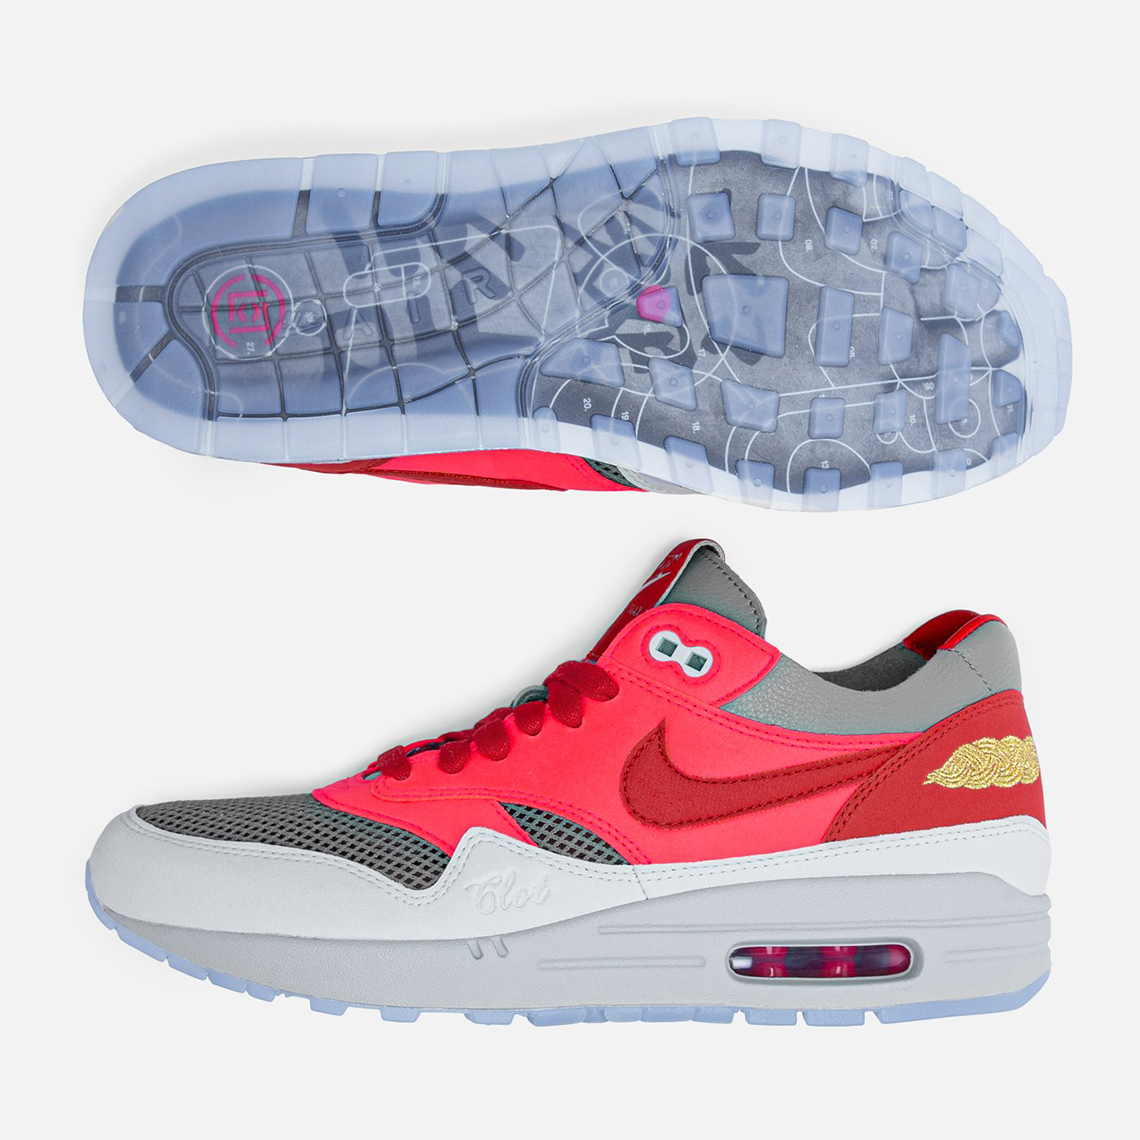 CLOT Nike Air Max 1 KOD Solar Red Release Date 2